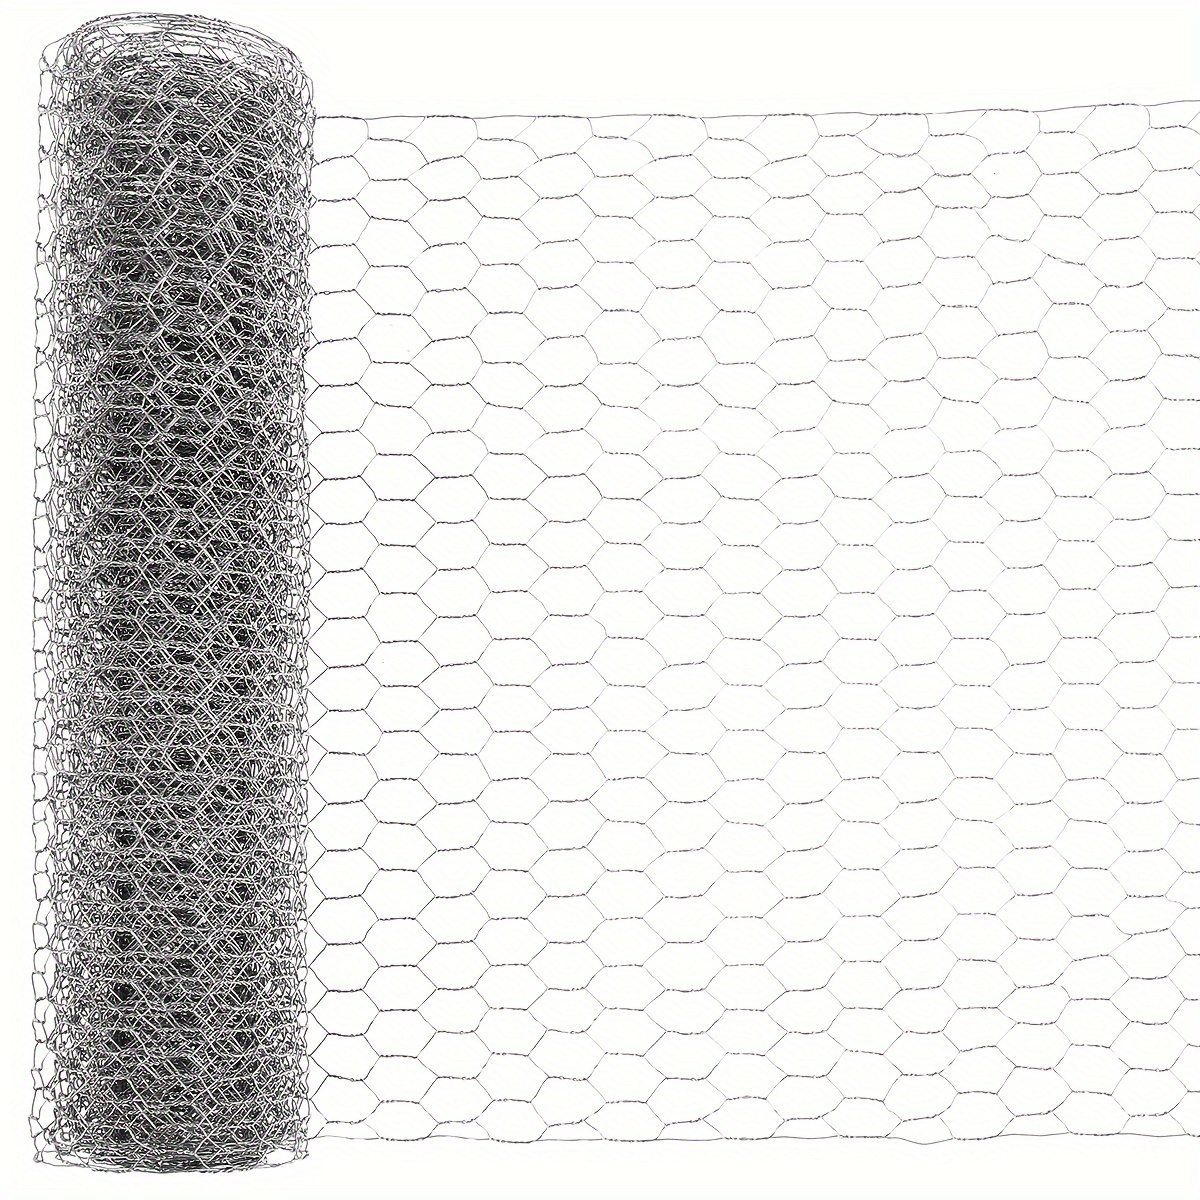 Reusable Plastic Chicken Wire Fence Mesh Durable Hexagonal Mesh DIY Project for Home Garden Courtyard(White) White